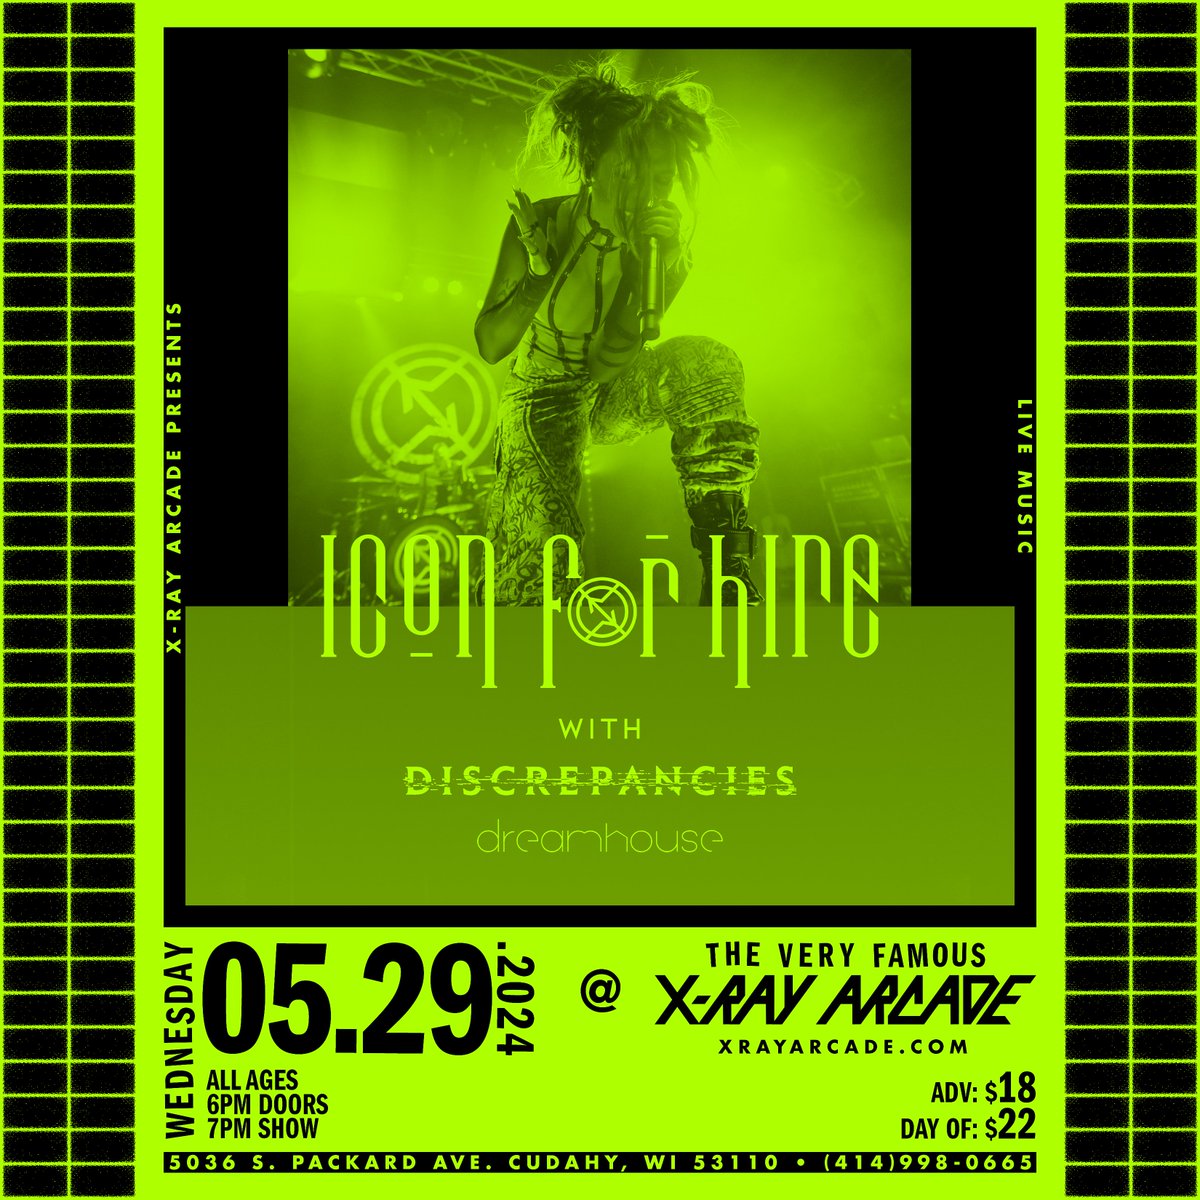 📢ANNOUNCING 📢 We're stoked to share the stage w/ @iconforhire & our old label mates in @Discrepanciestv ! Tickets go on sale tomorrow at 10AM, snag yours right away! 🎟️ xrayarcade.com ❤️ 6PM DOORS // 7PM SHOW 💀 ALL AGES // $18 ADV // $22 DOS 🖤 PRESENTED- @xrayarcade